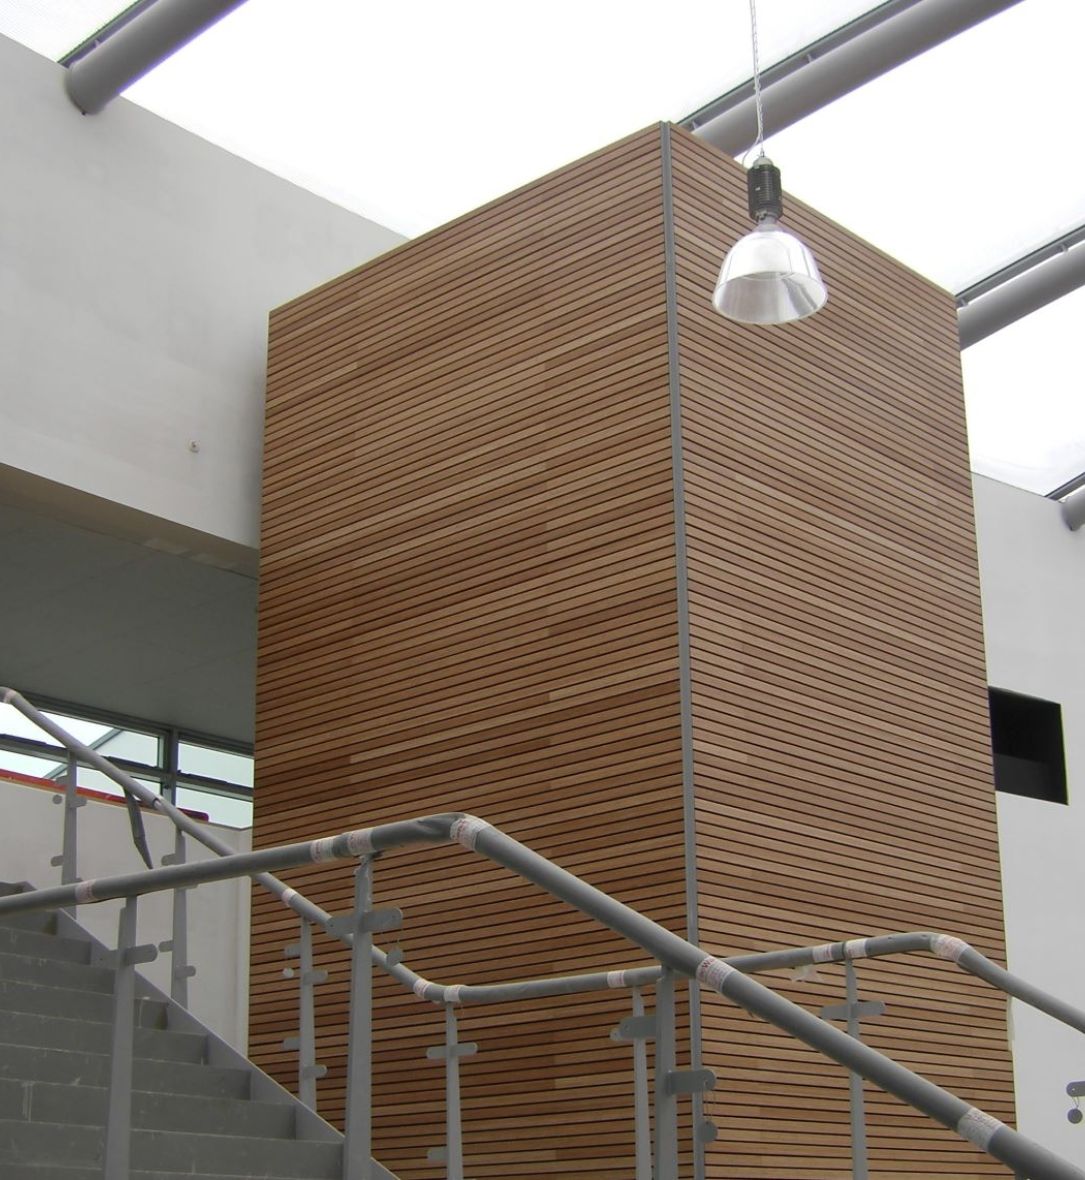 Internal wooden slatted walls by BCL Timber at Cressex Community School, St Albans